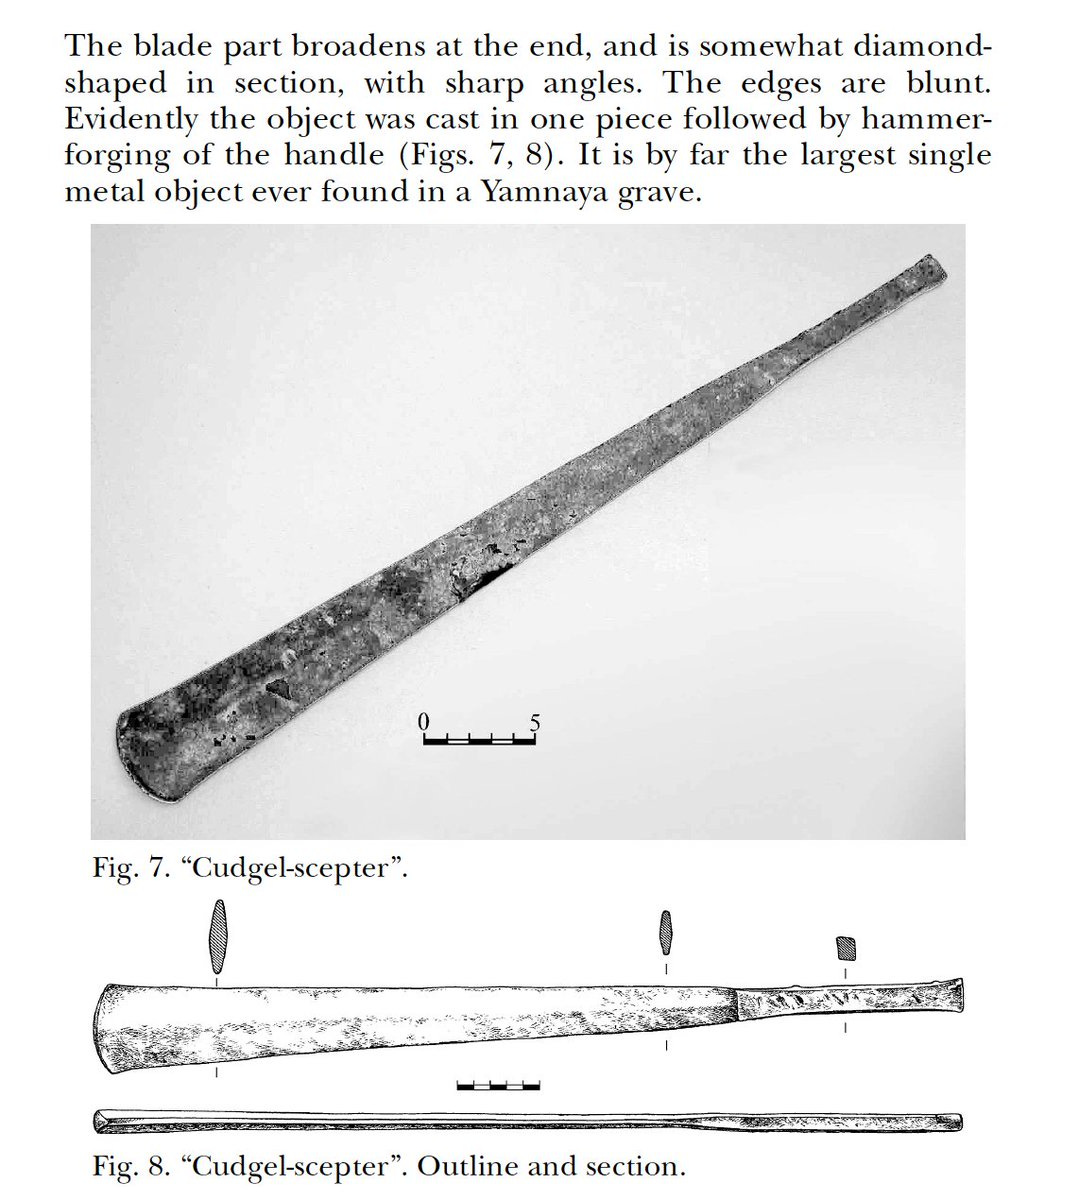 Aryāṃśa on X: "This copper cudgel-scepter found in a late Yamna Kurgan is  the likely prototype of the infamous Vajra of Indra Deva. It's a unique  object, and the single largest metal